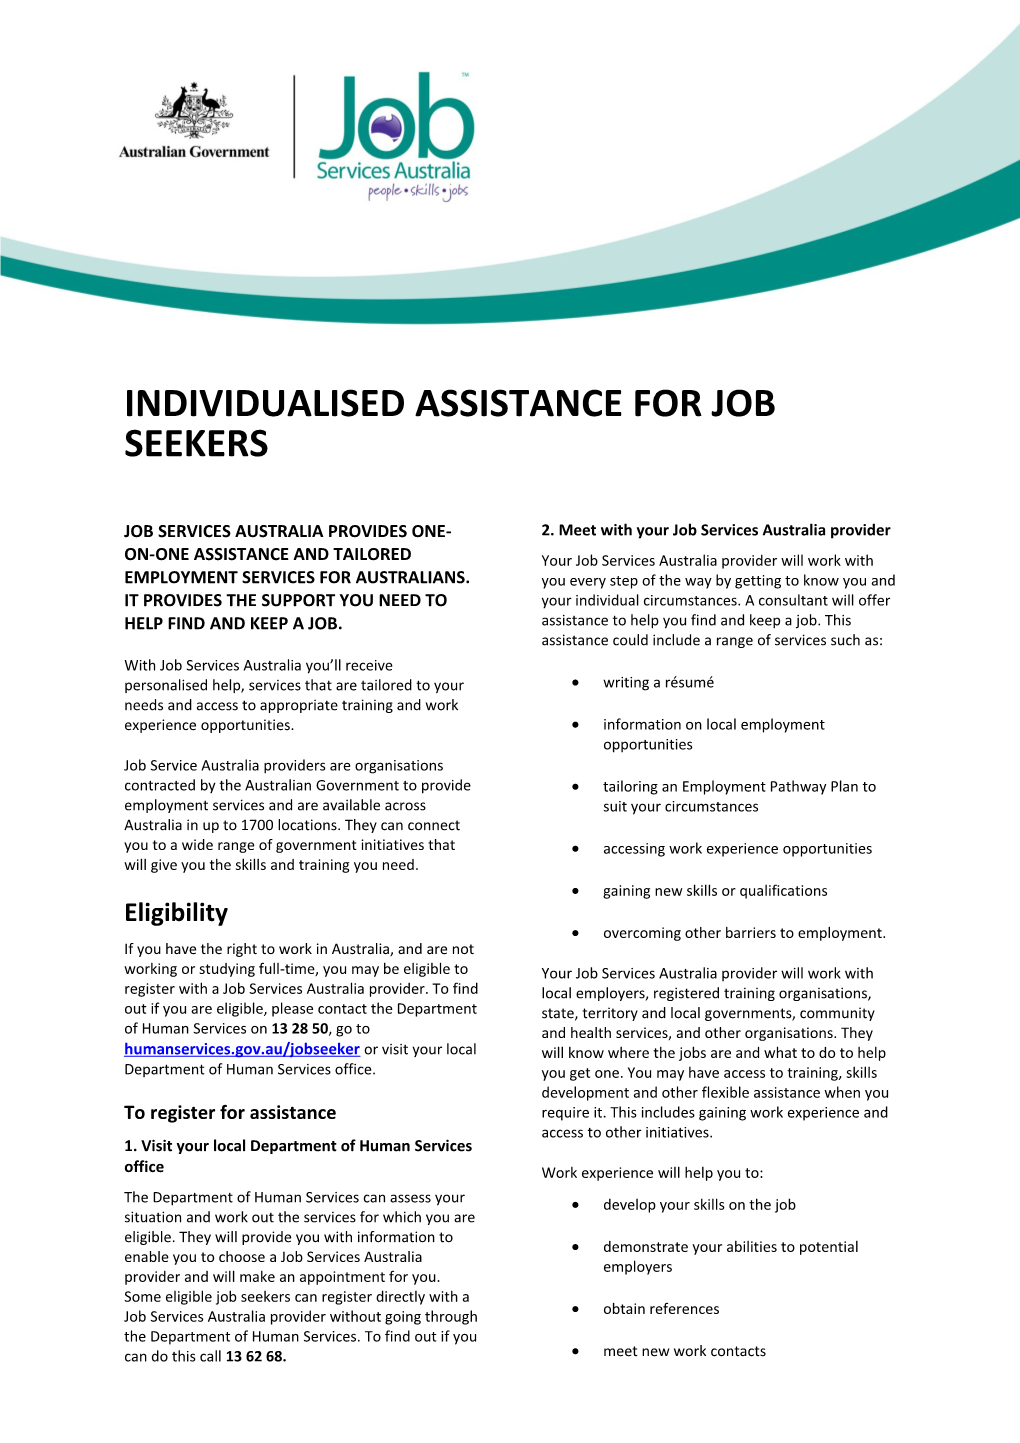 Individualised Assistance for Job Seekers